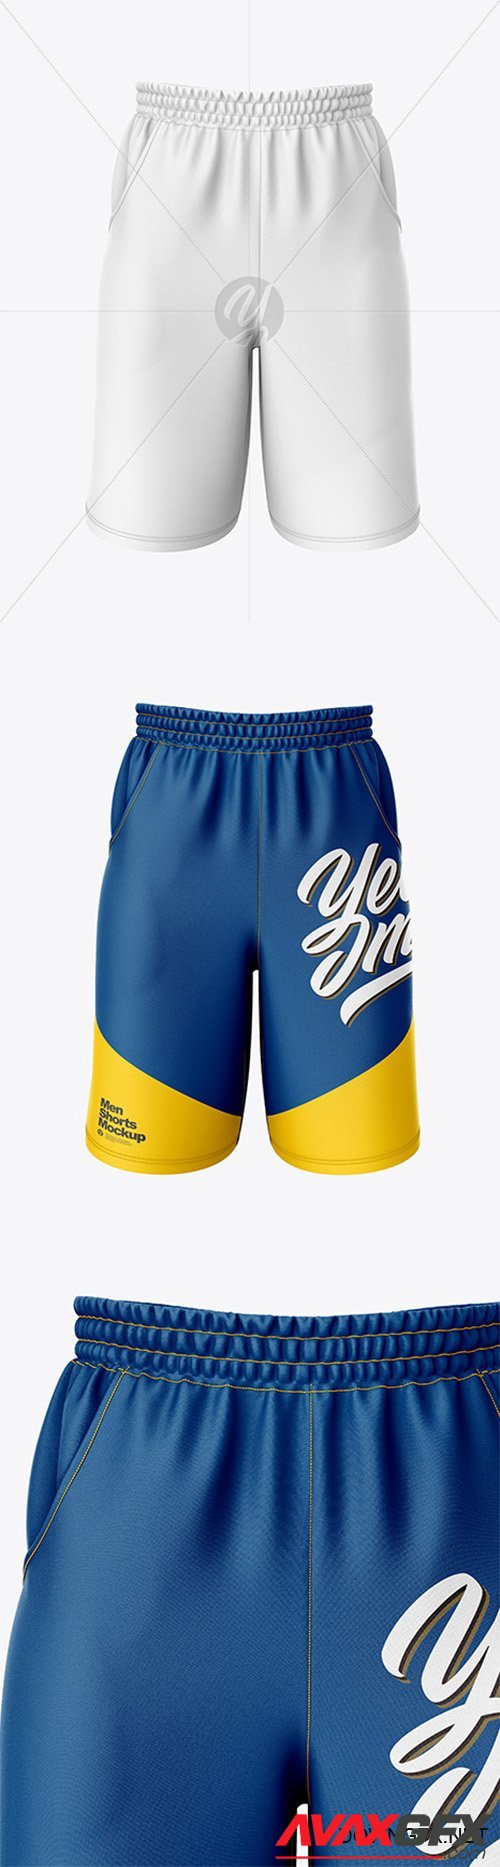 Compression Shorts Mockup – Front View 55385